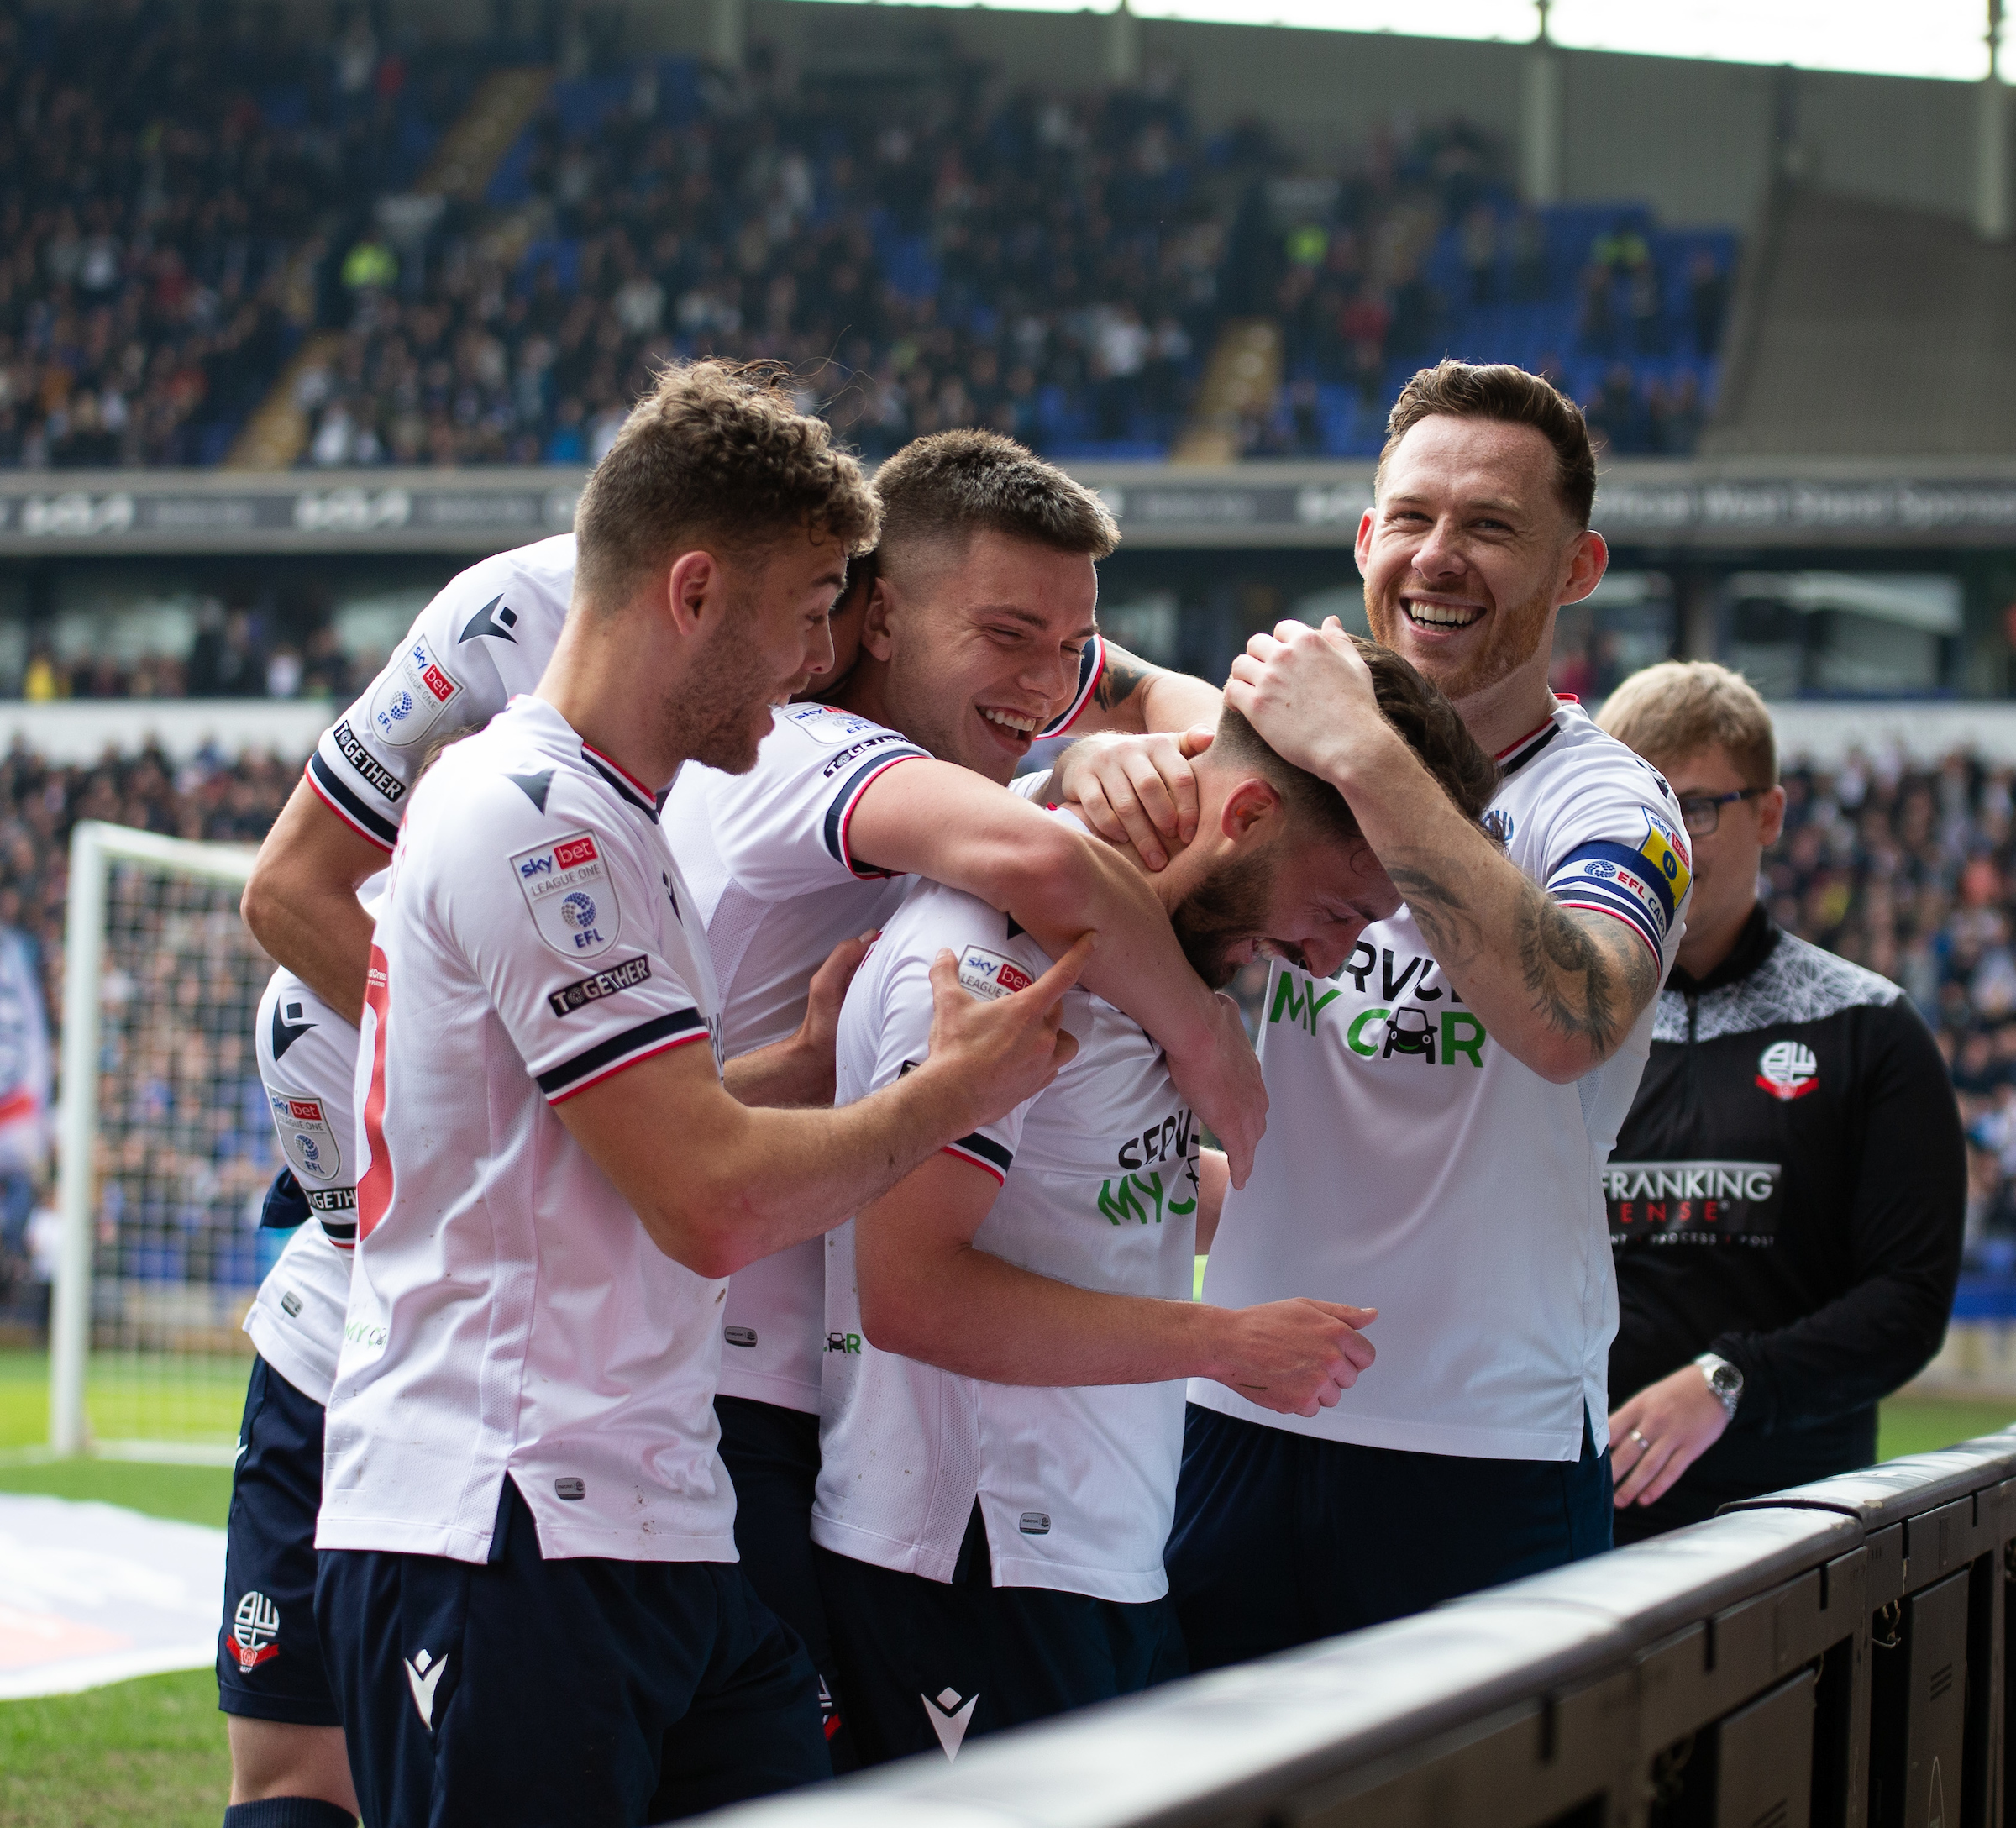 League One permutations: Title race, play-offs and relegation battle